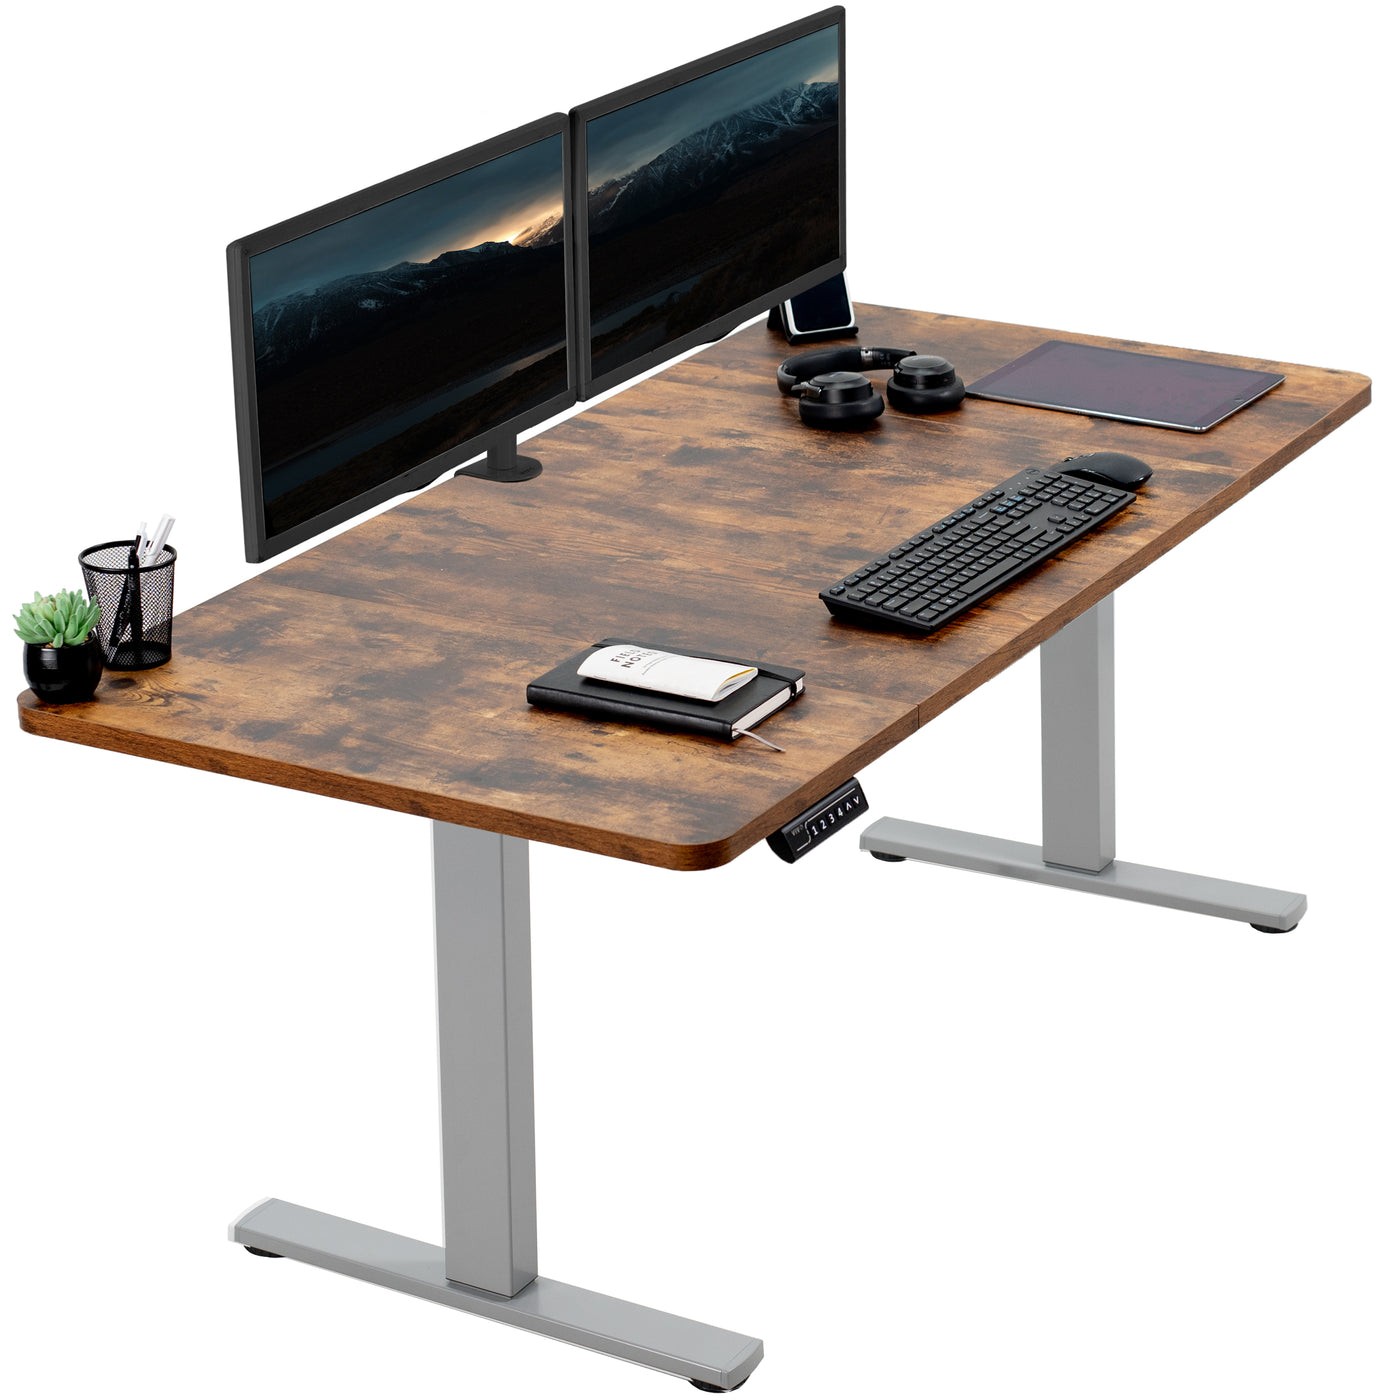 Rustic sturdy ergonomic sit or stand active desk workstation with adjustable height using smart control panel.